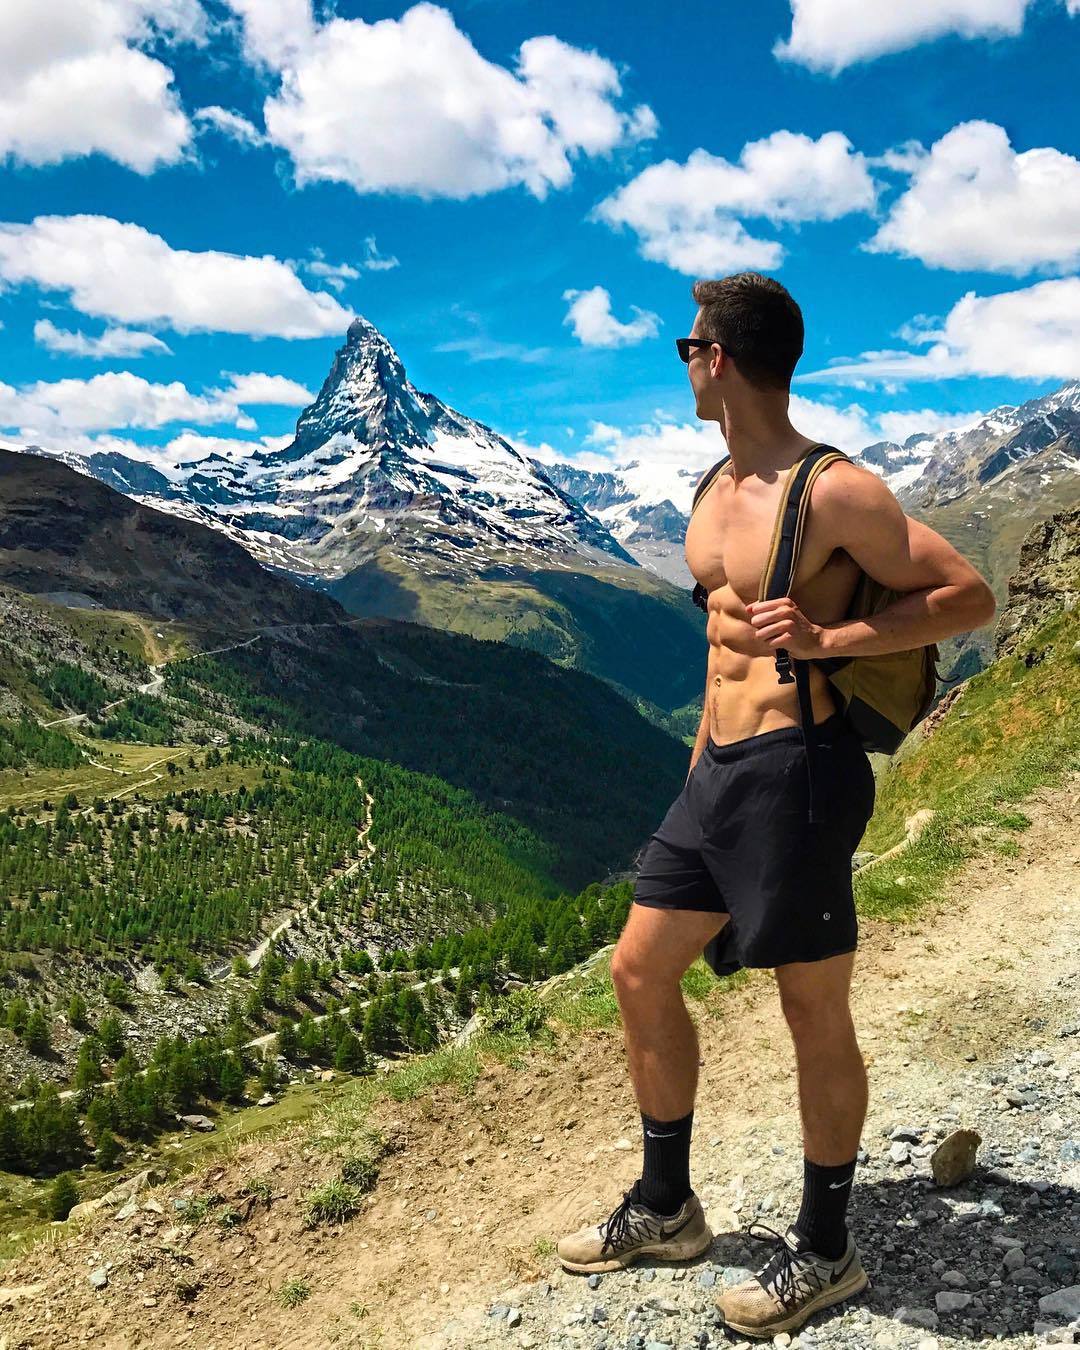 handsome-fit-shirtless-hipster-guy-abs-sightseeing-mountain-walking